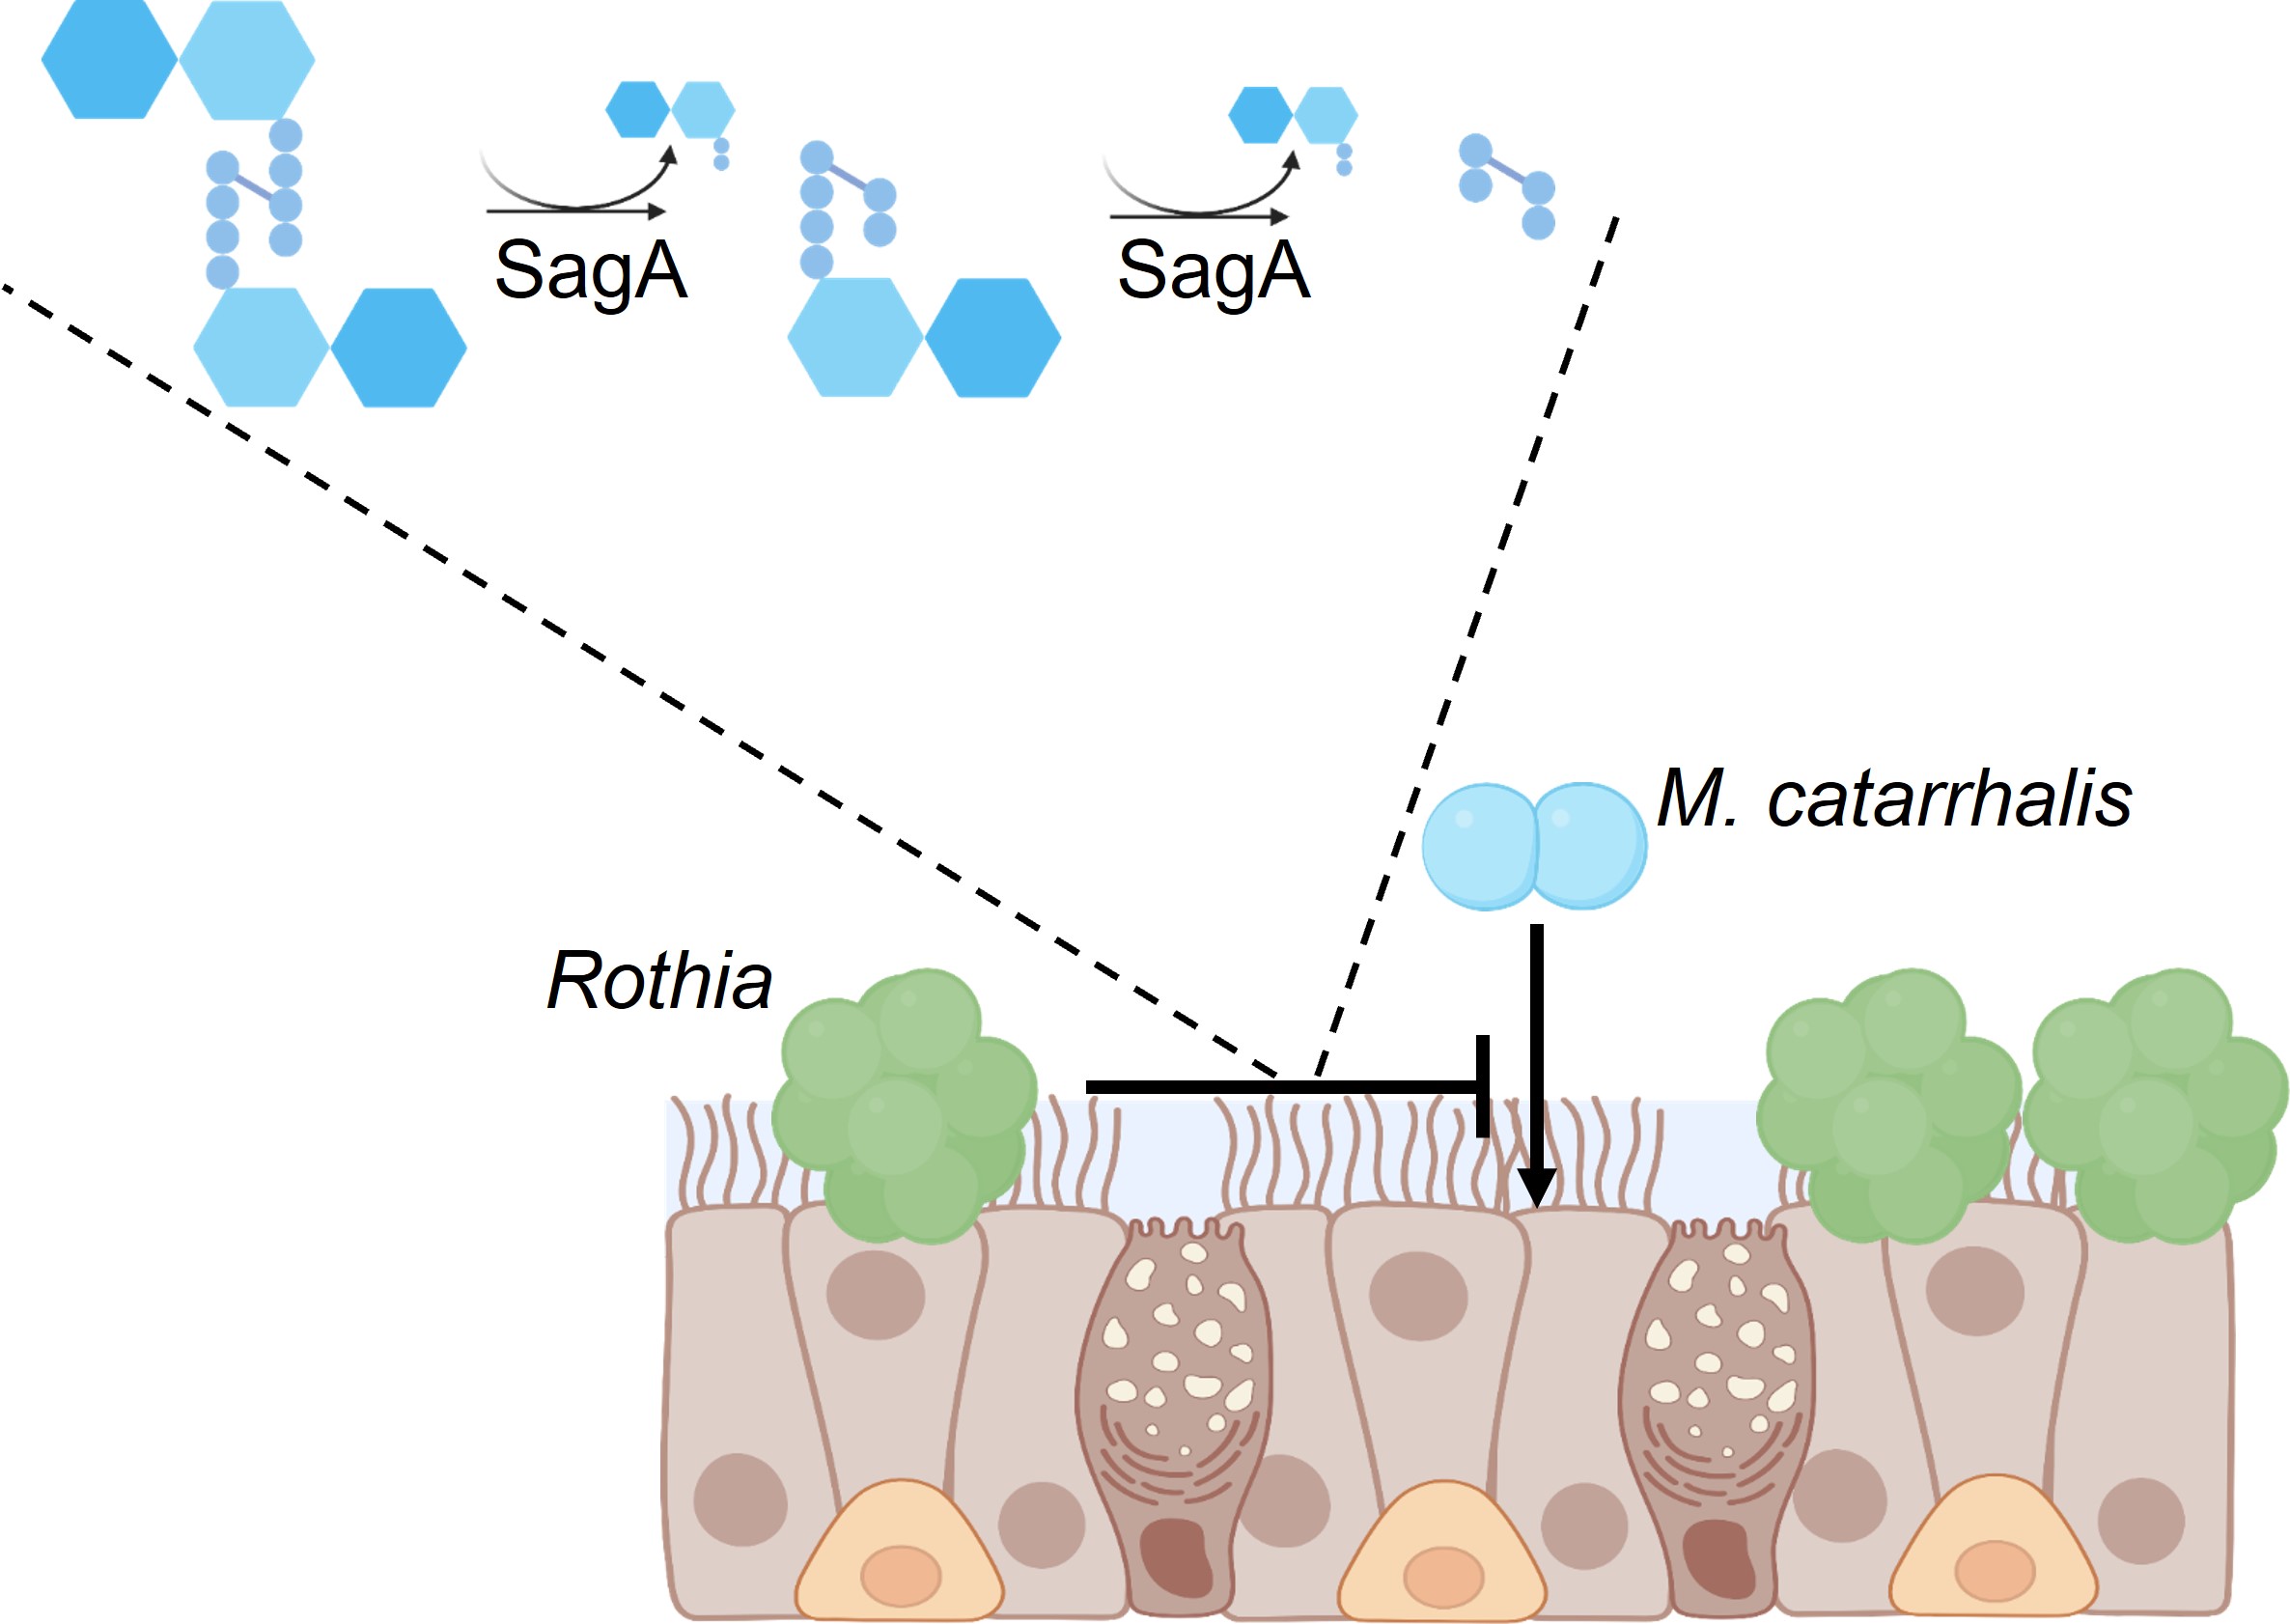 Rothia produce the enzyme SagA, which degrades M. catarrhalis peptidoglycan and prevents pathogen colonization